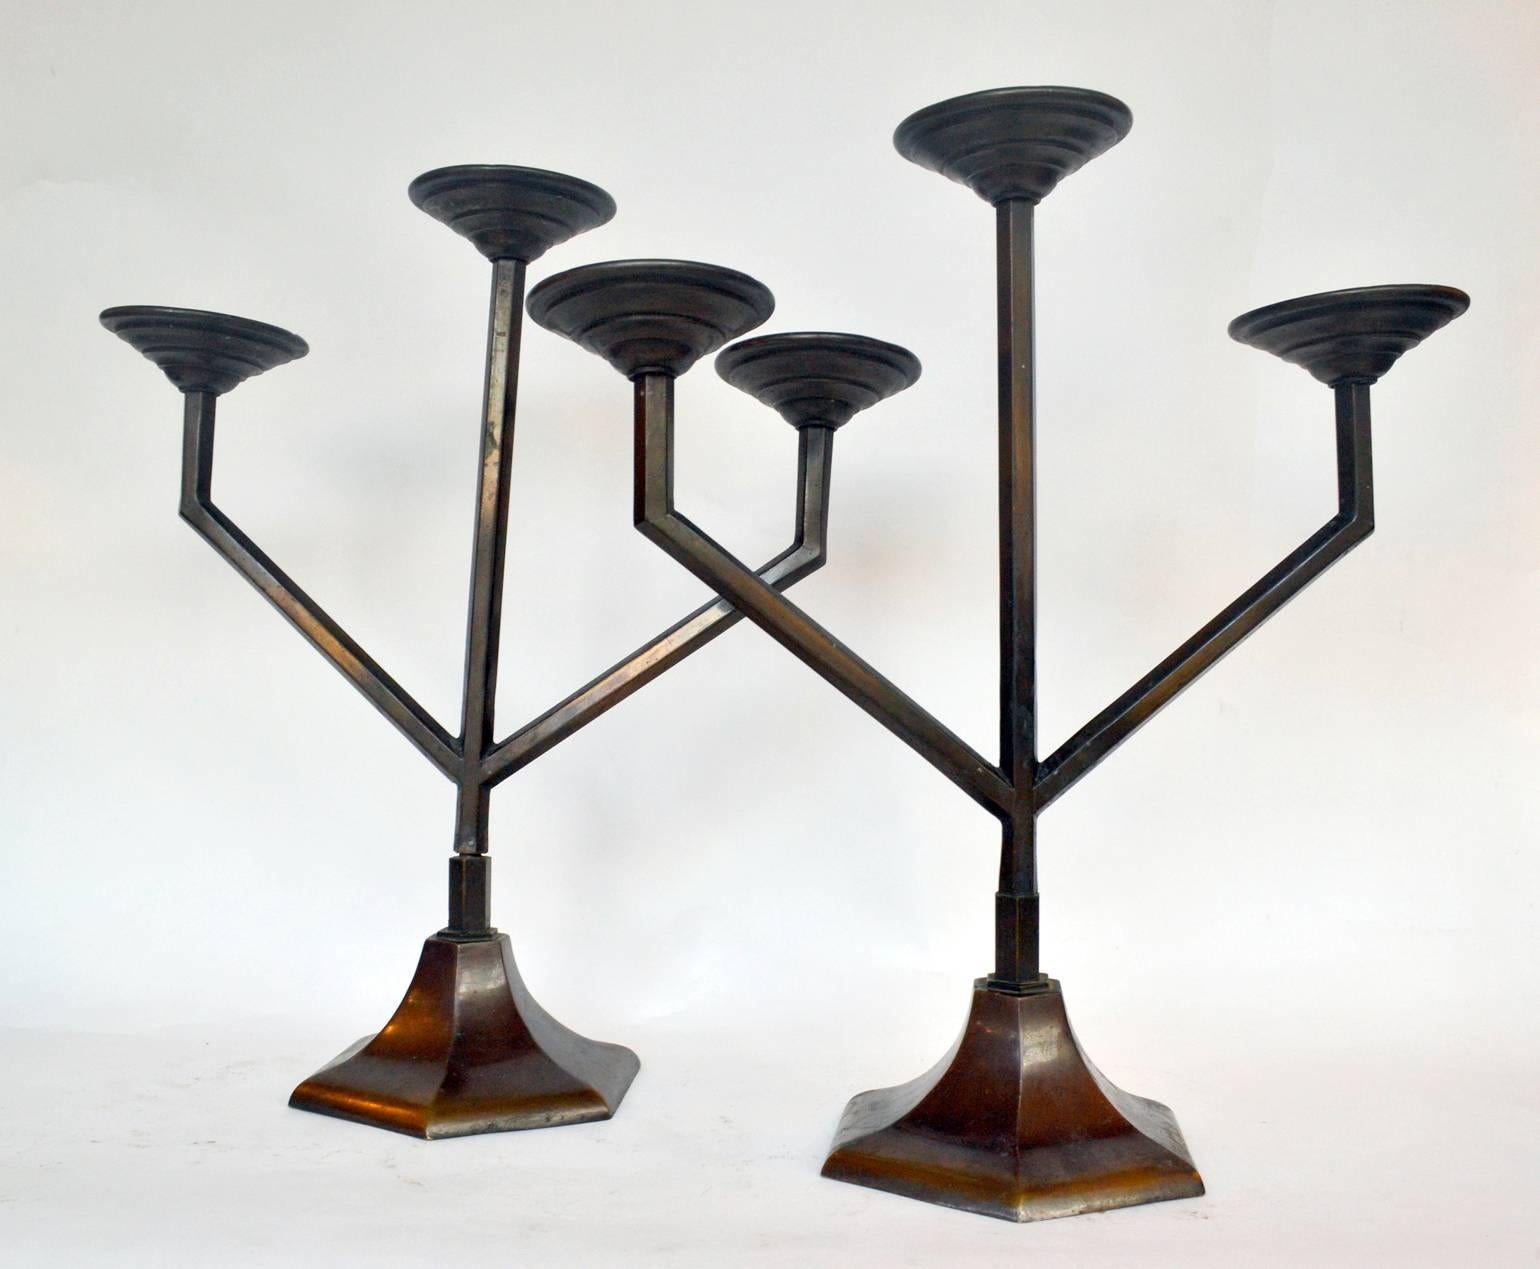 Two Art Deco handcrafted copper candelabras each with three arms and designed with geometric lines. The copper has a dark patina.